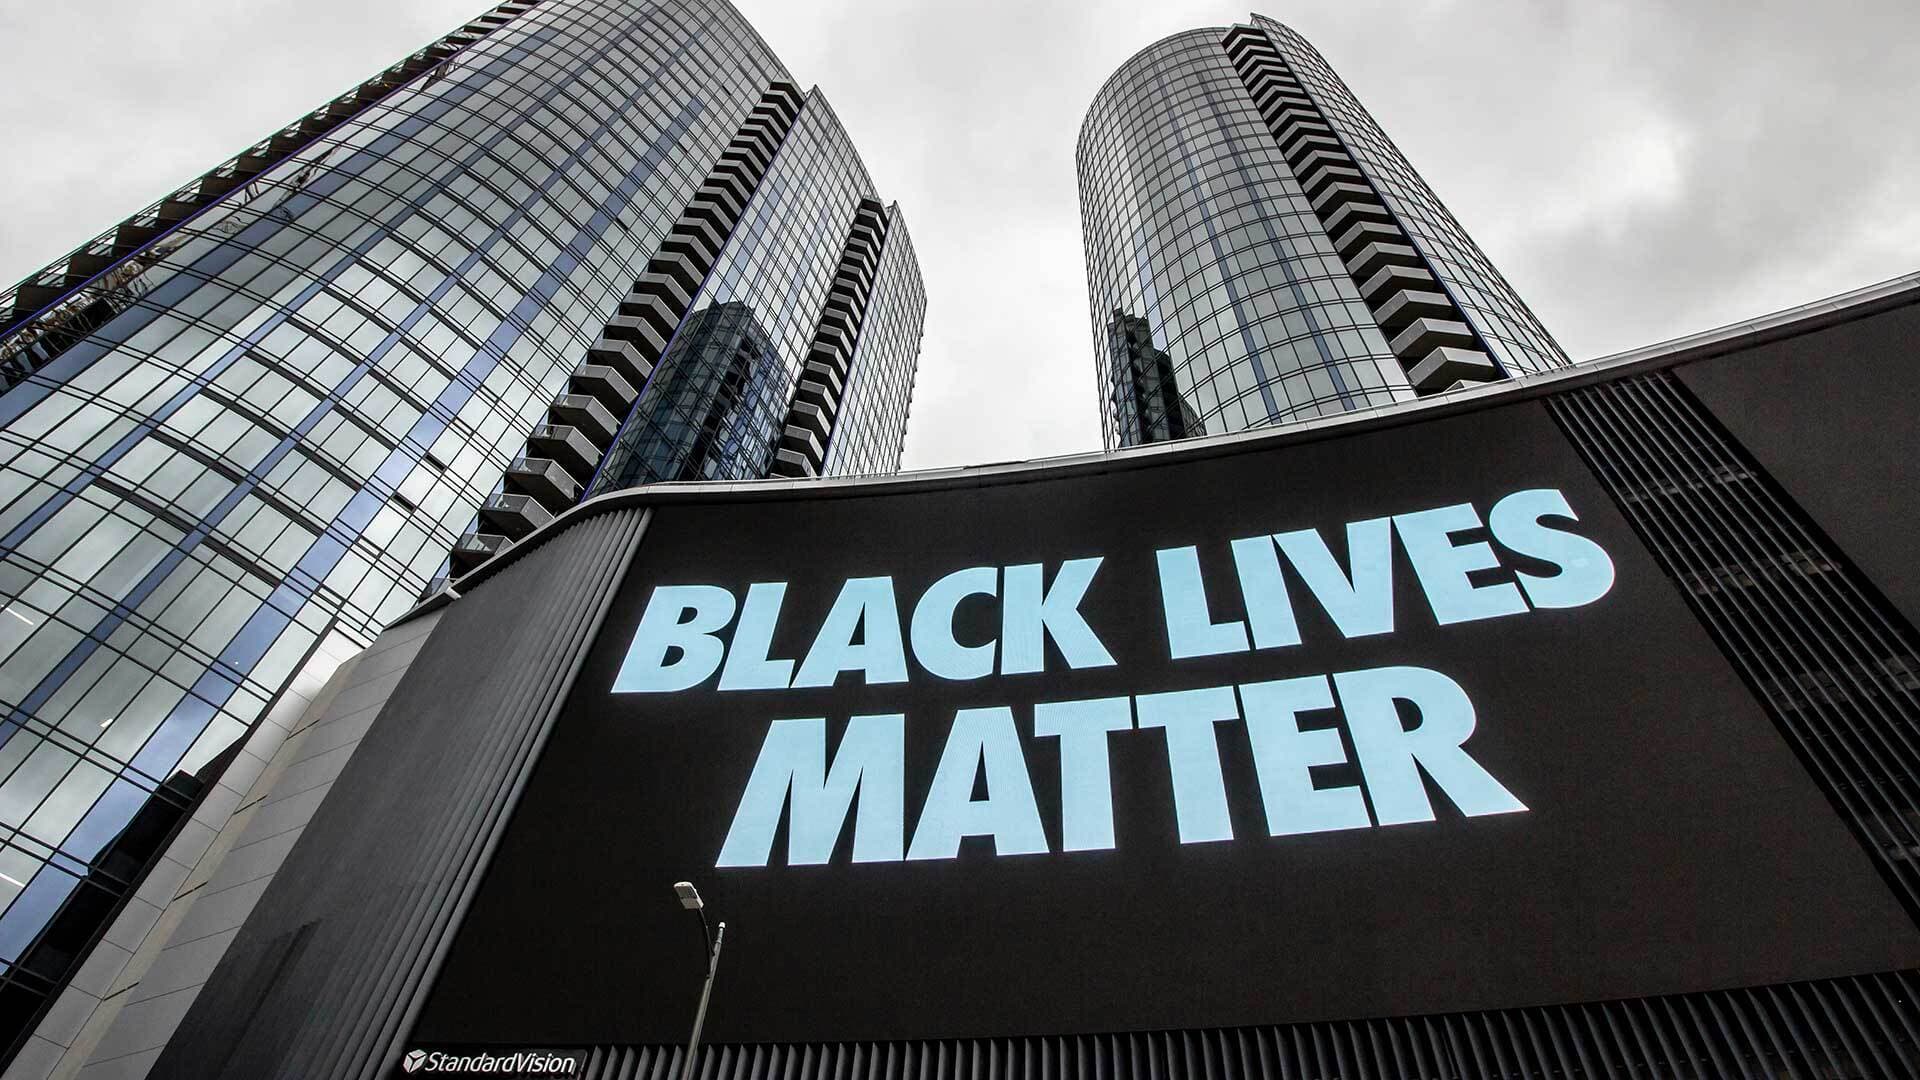 BLM and corporate building